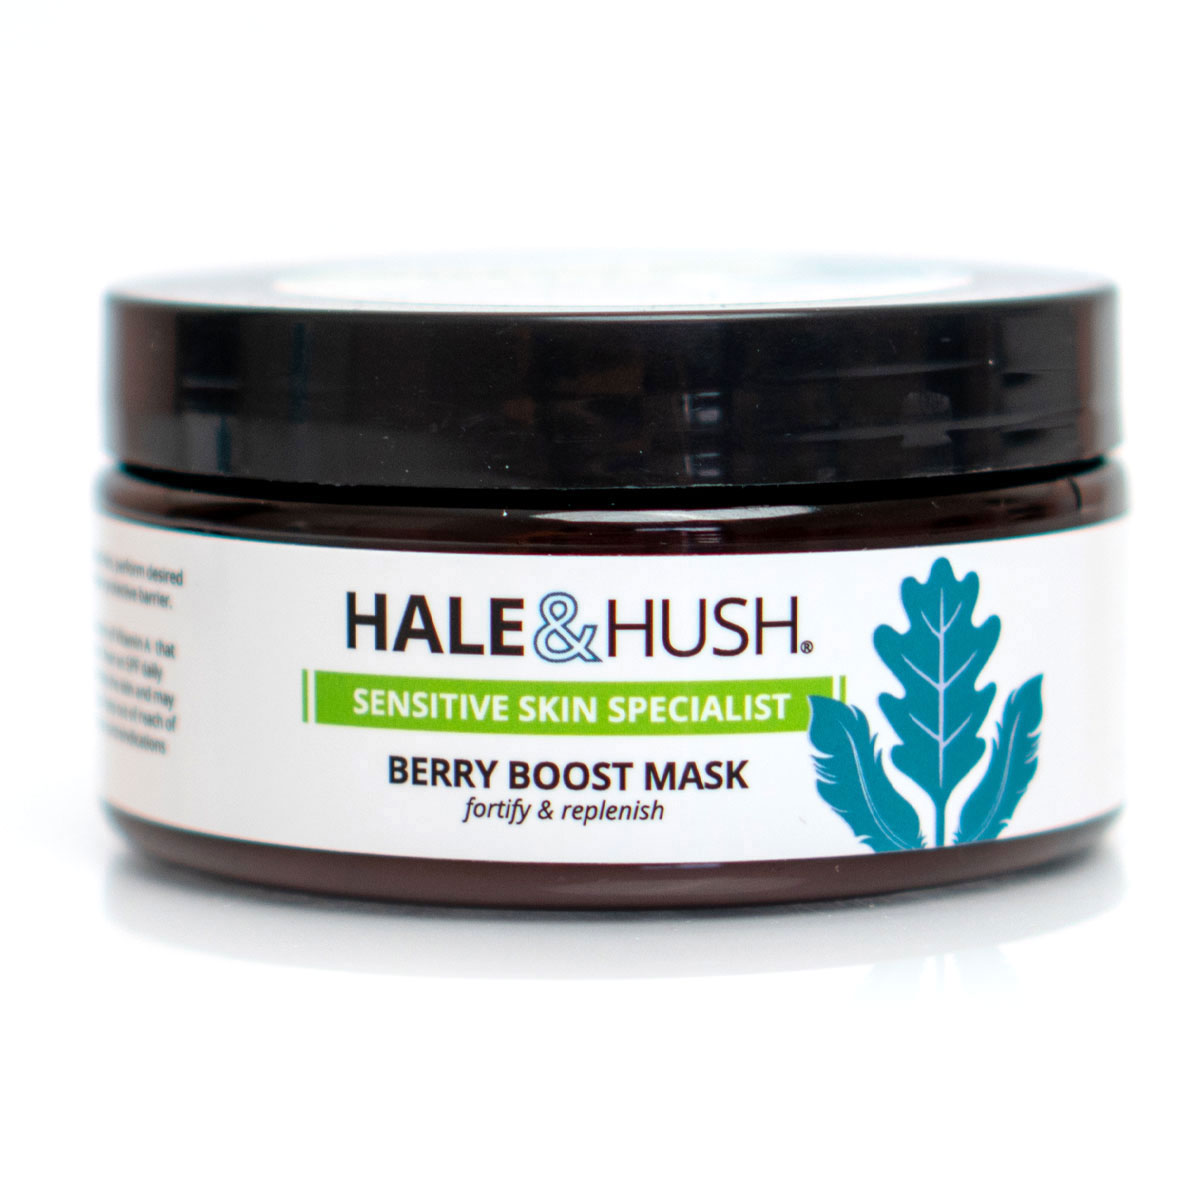 Berry Boost Mask